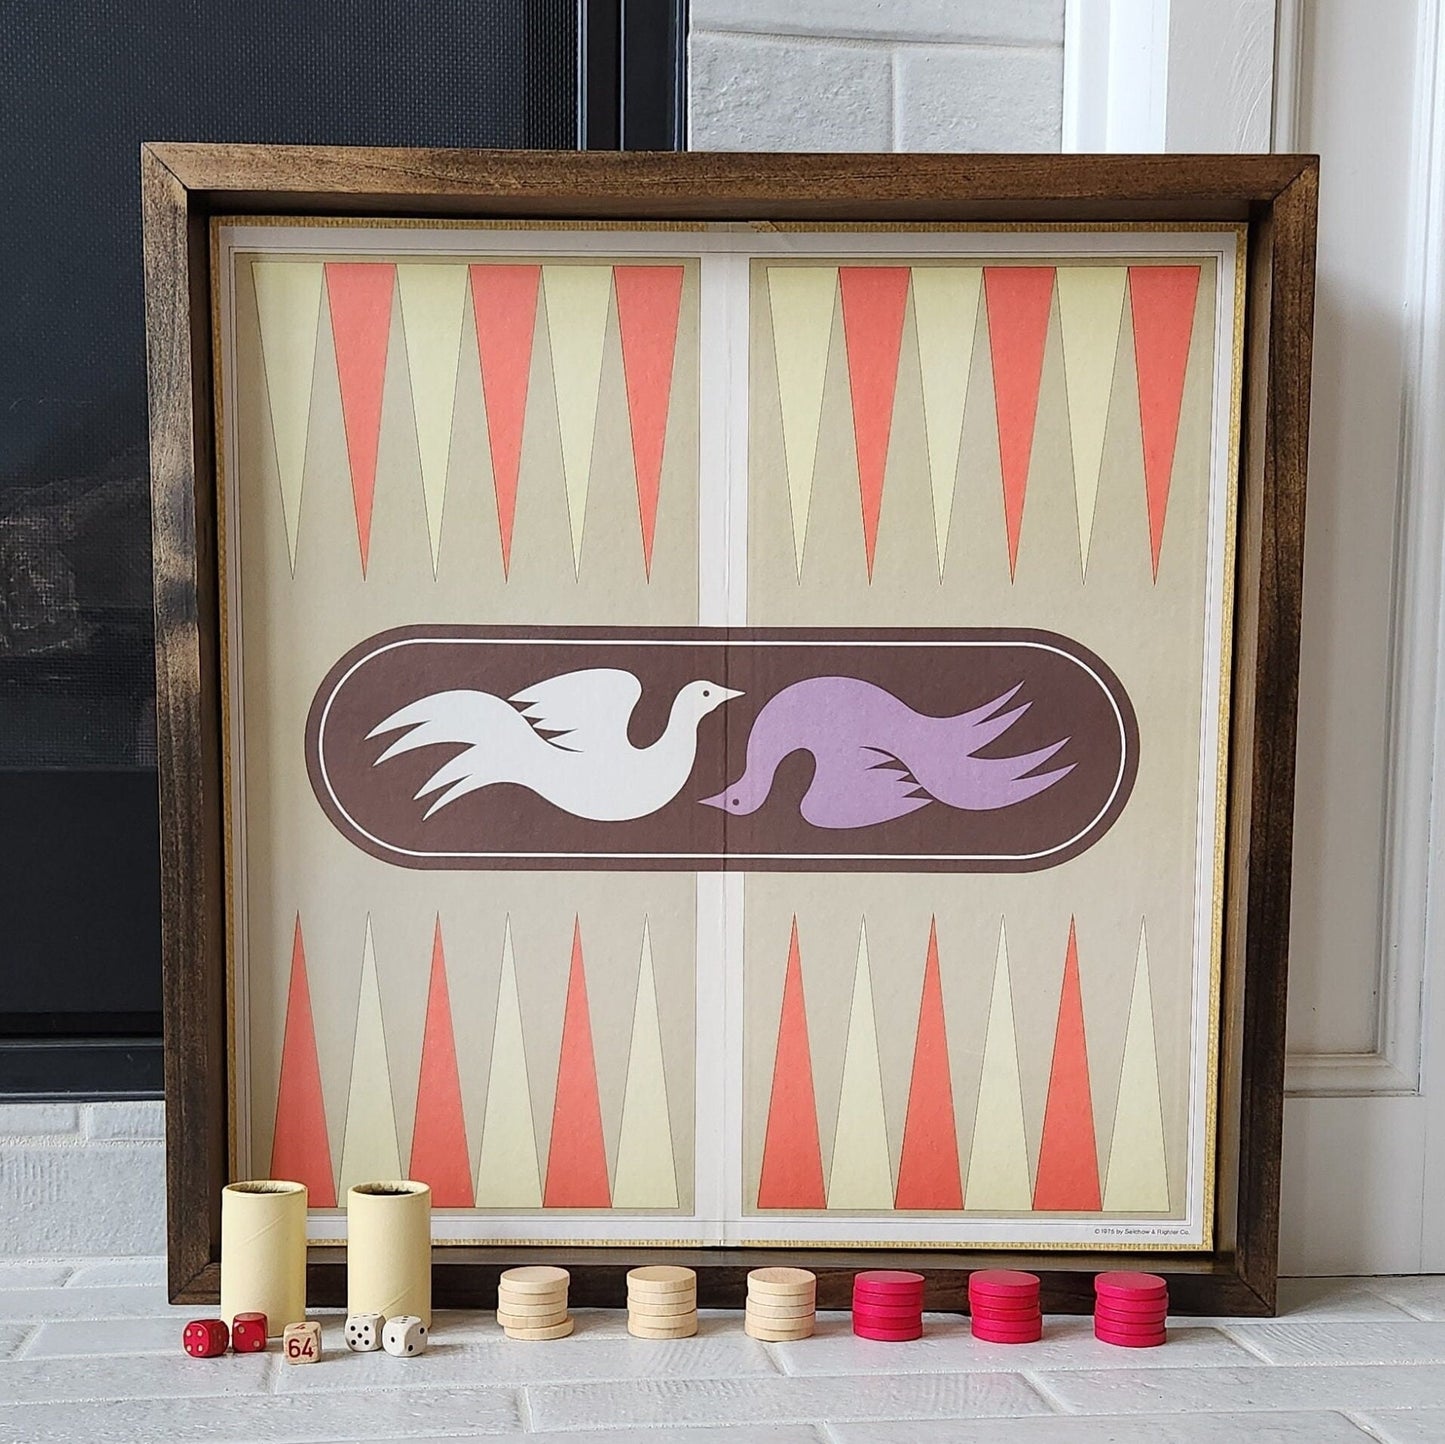 Display and Play 1975 Backgammon Framed Board Game